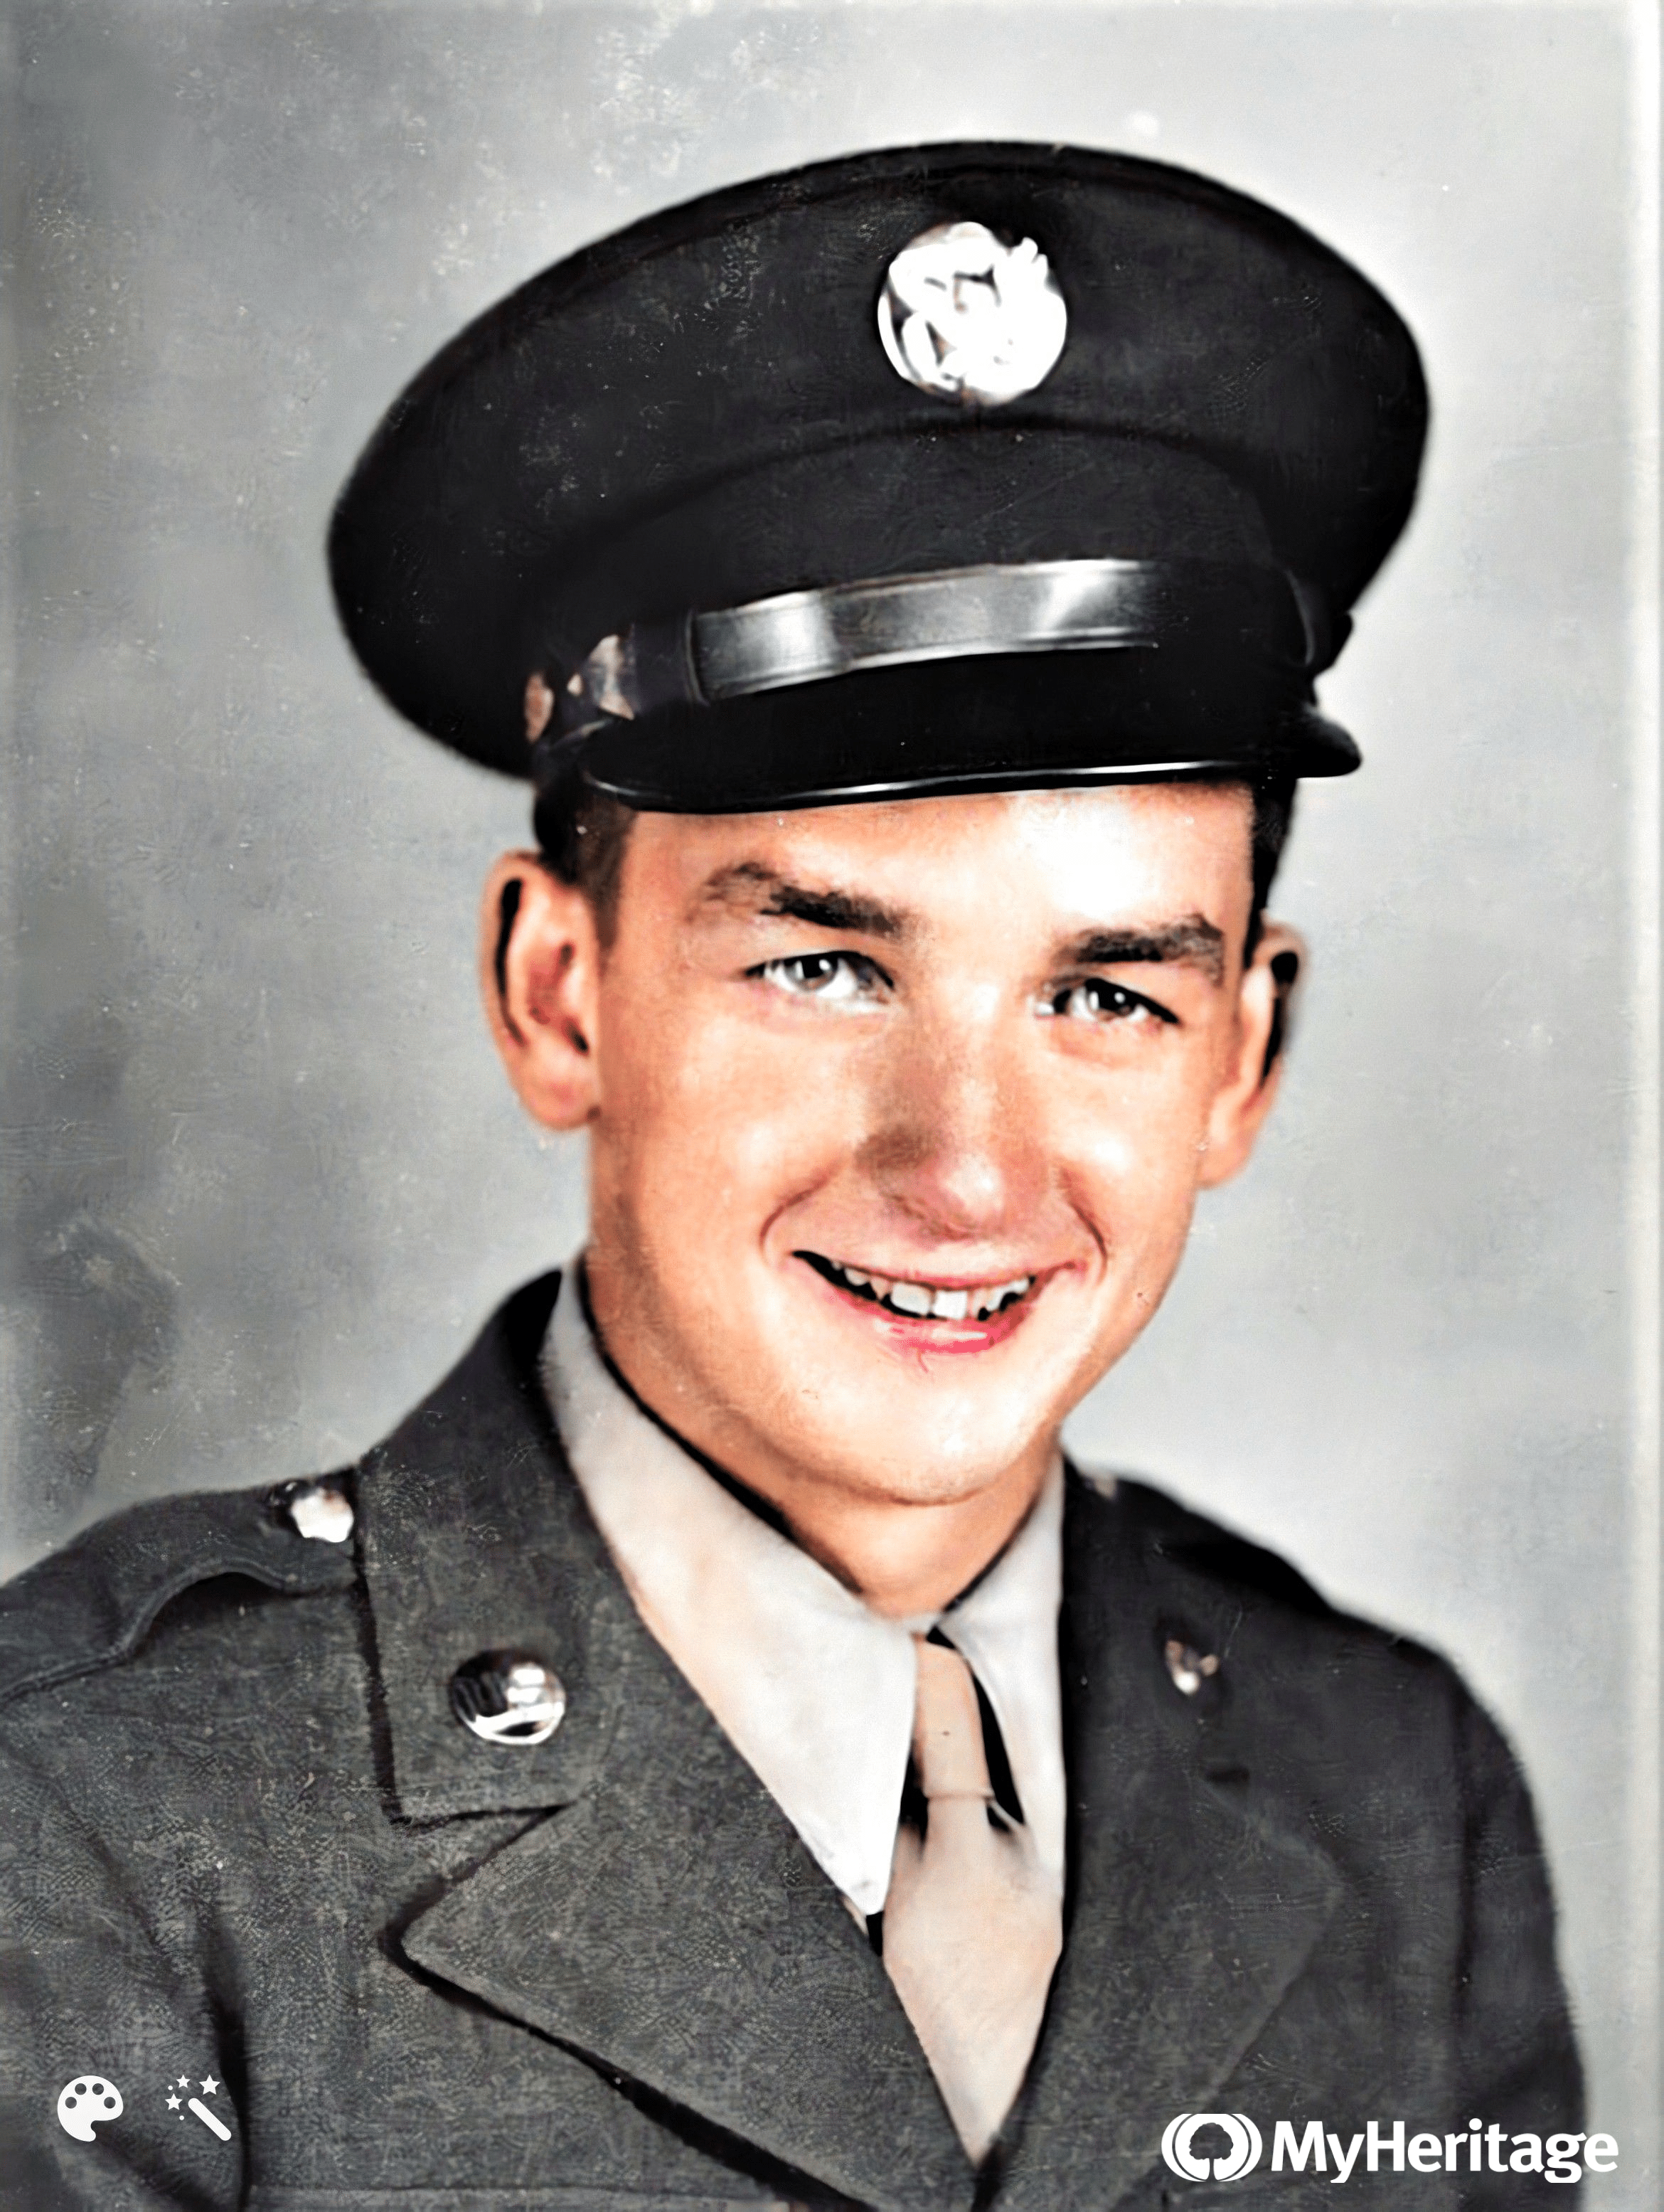 William ‘Bill’ Stevens. Photo enhanced and colorized by MyHeritage